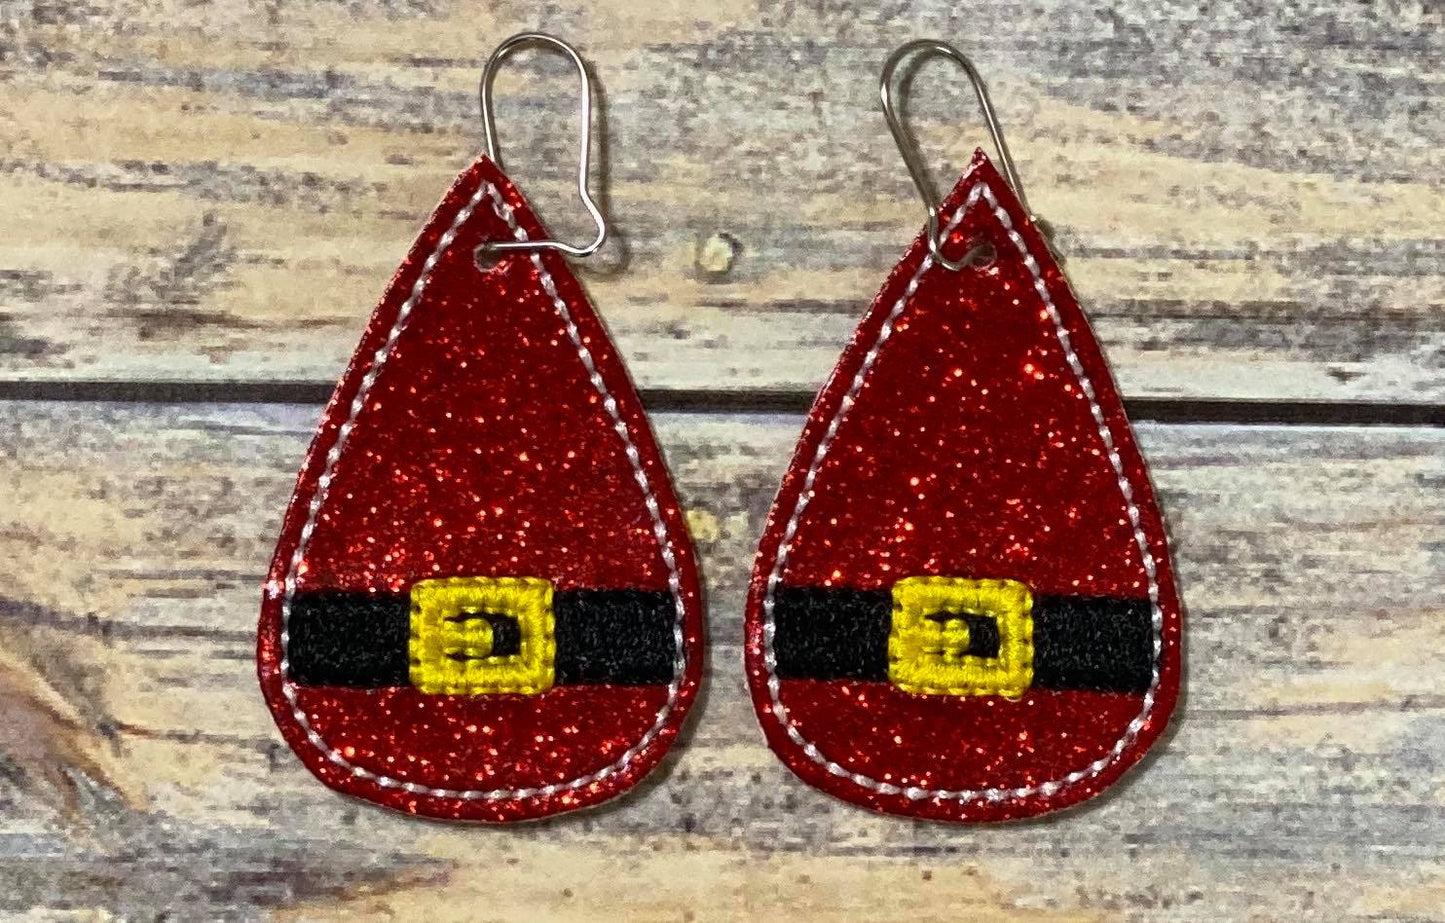 Santa Belt Earrings - 3 sizes - 4x4 and 5x7 Grouped- Digital Embroidery Design